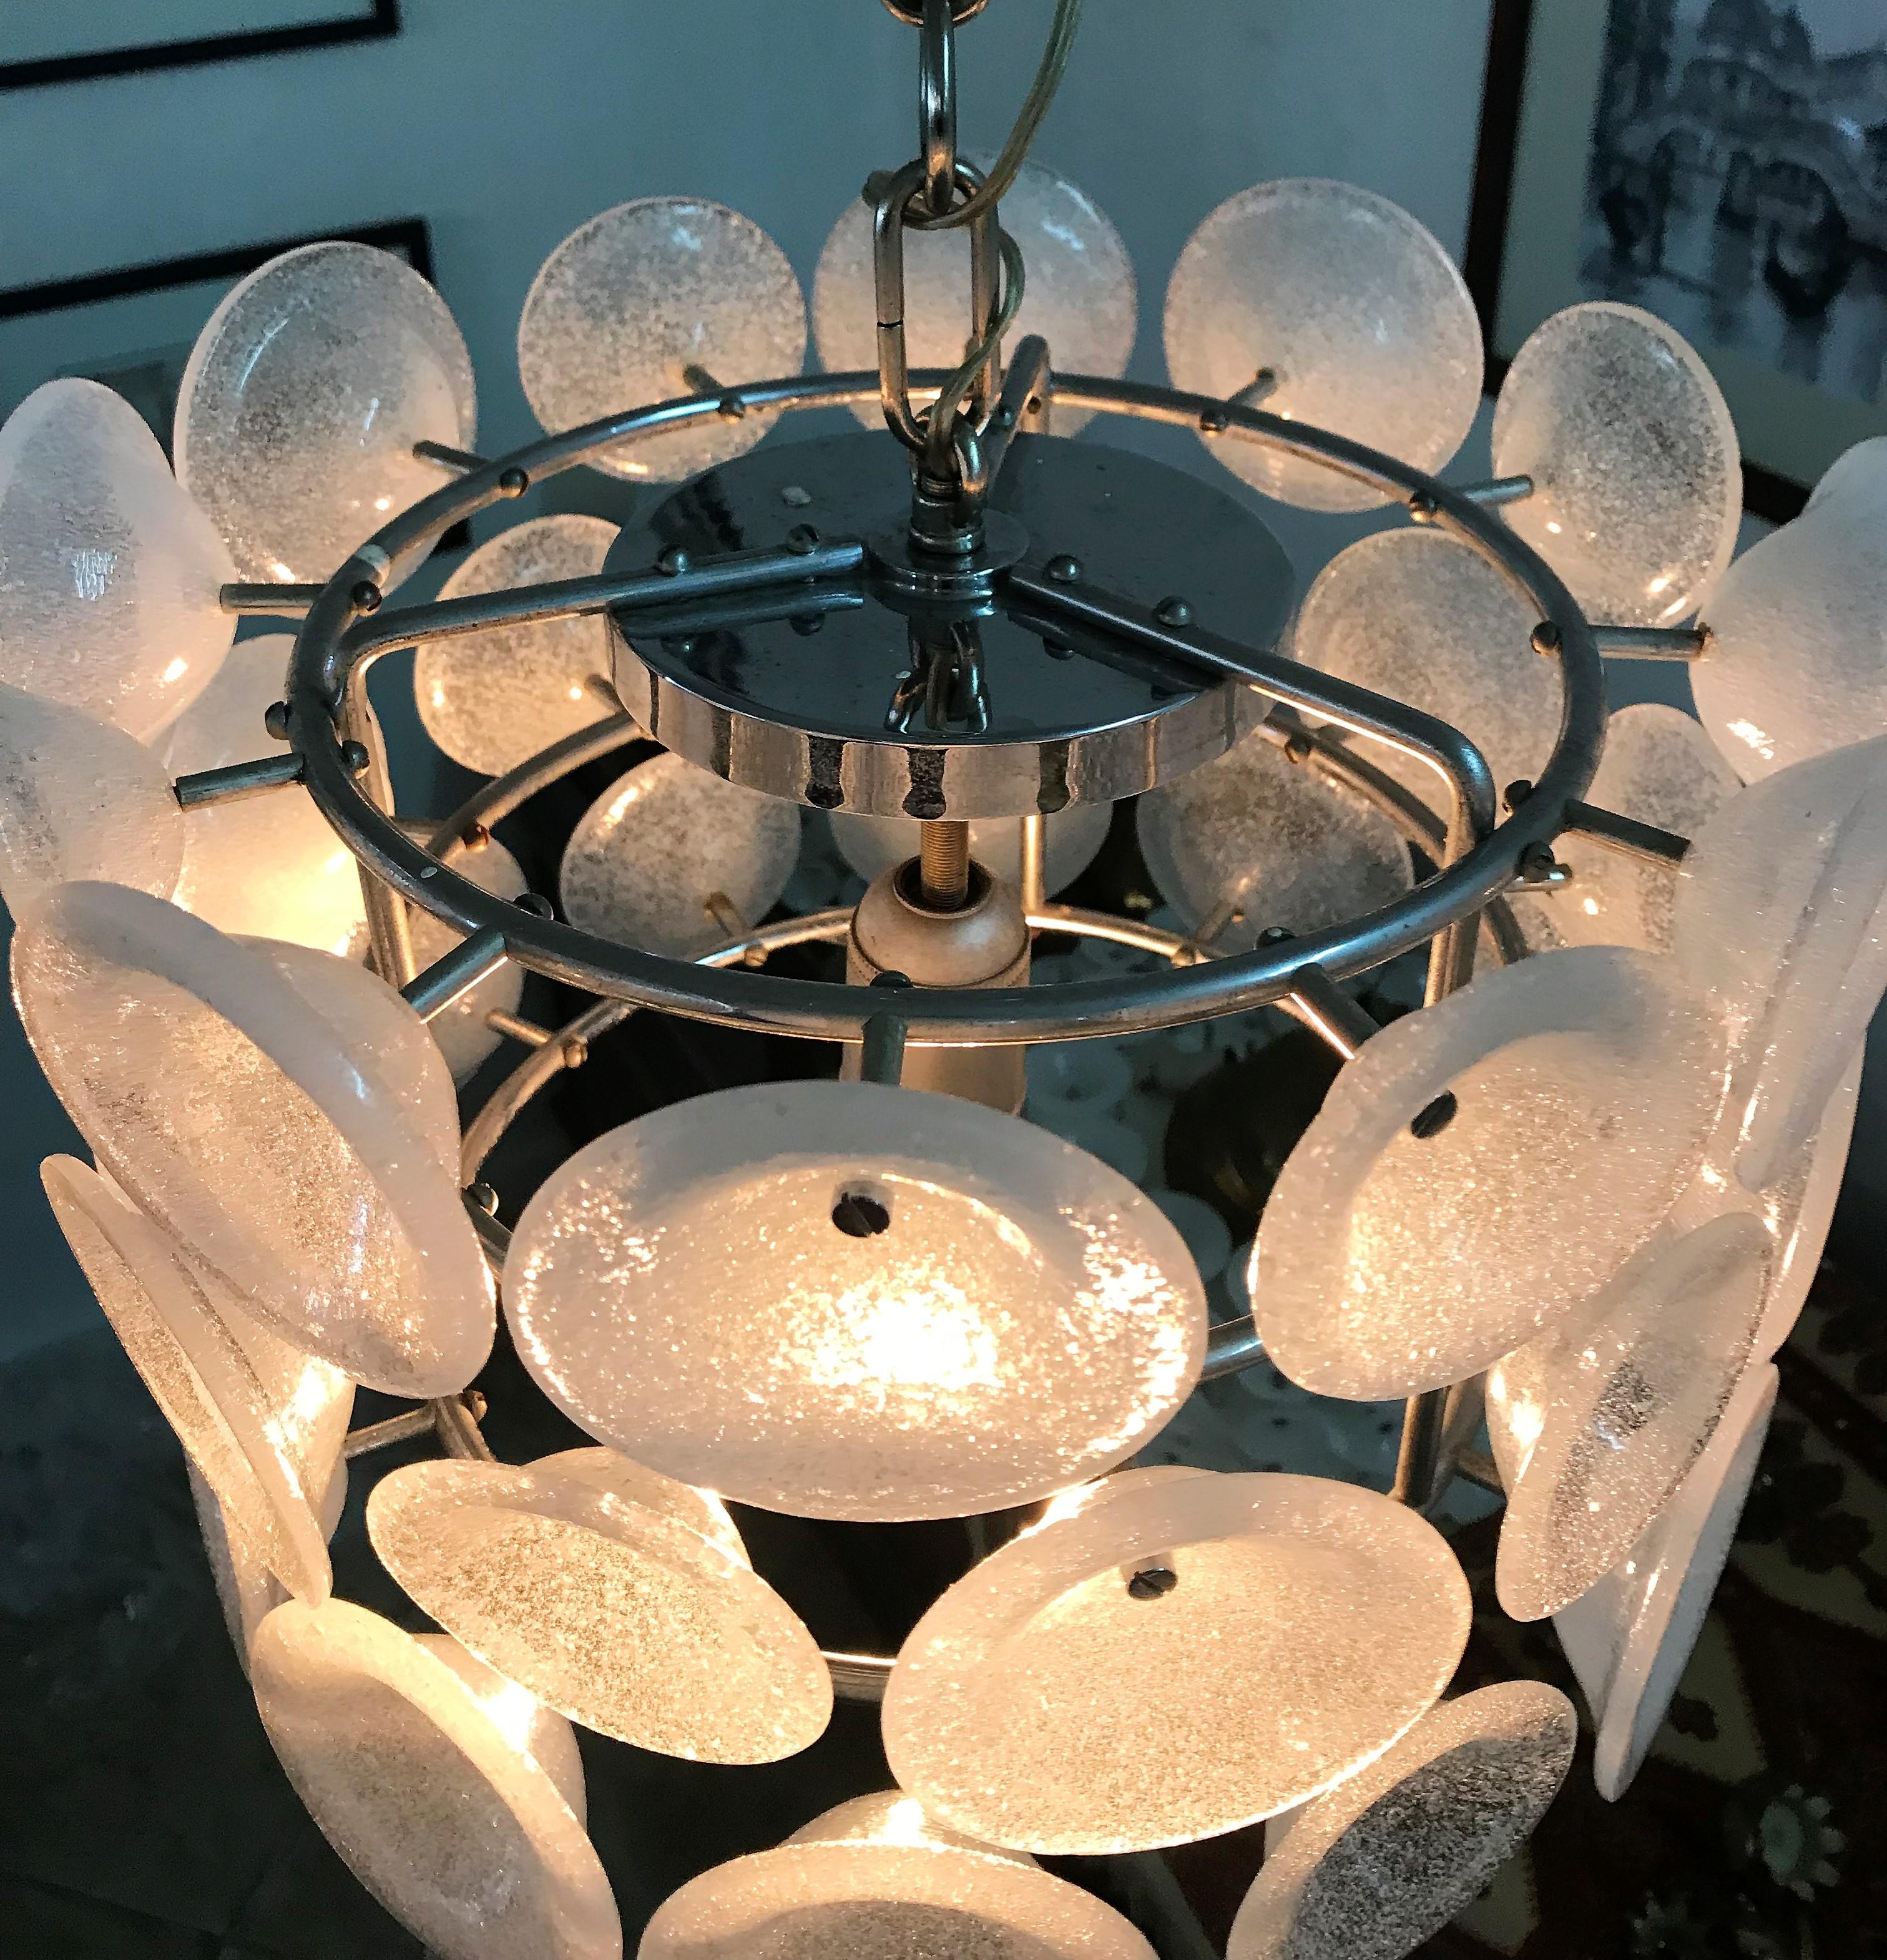 Mid-20th Century Mid-Century Modern Chandelier in Murano Pulegoso Glass, Attributed to Vistosi For Sale